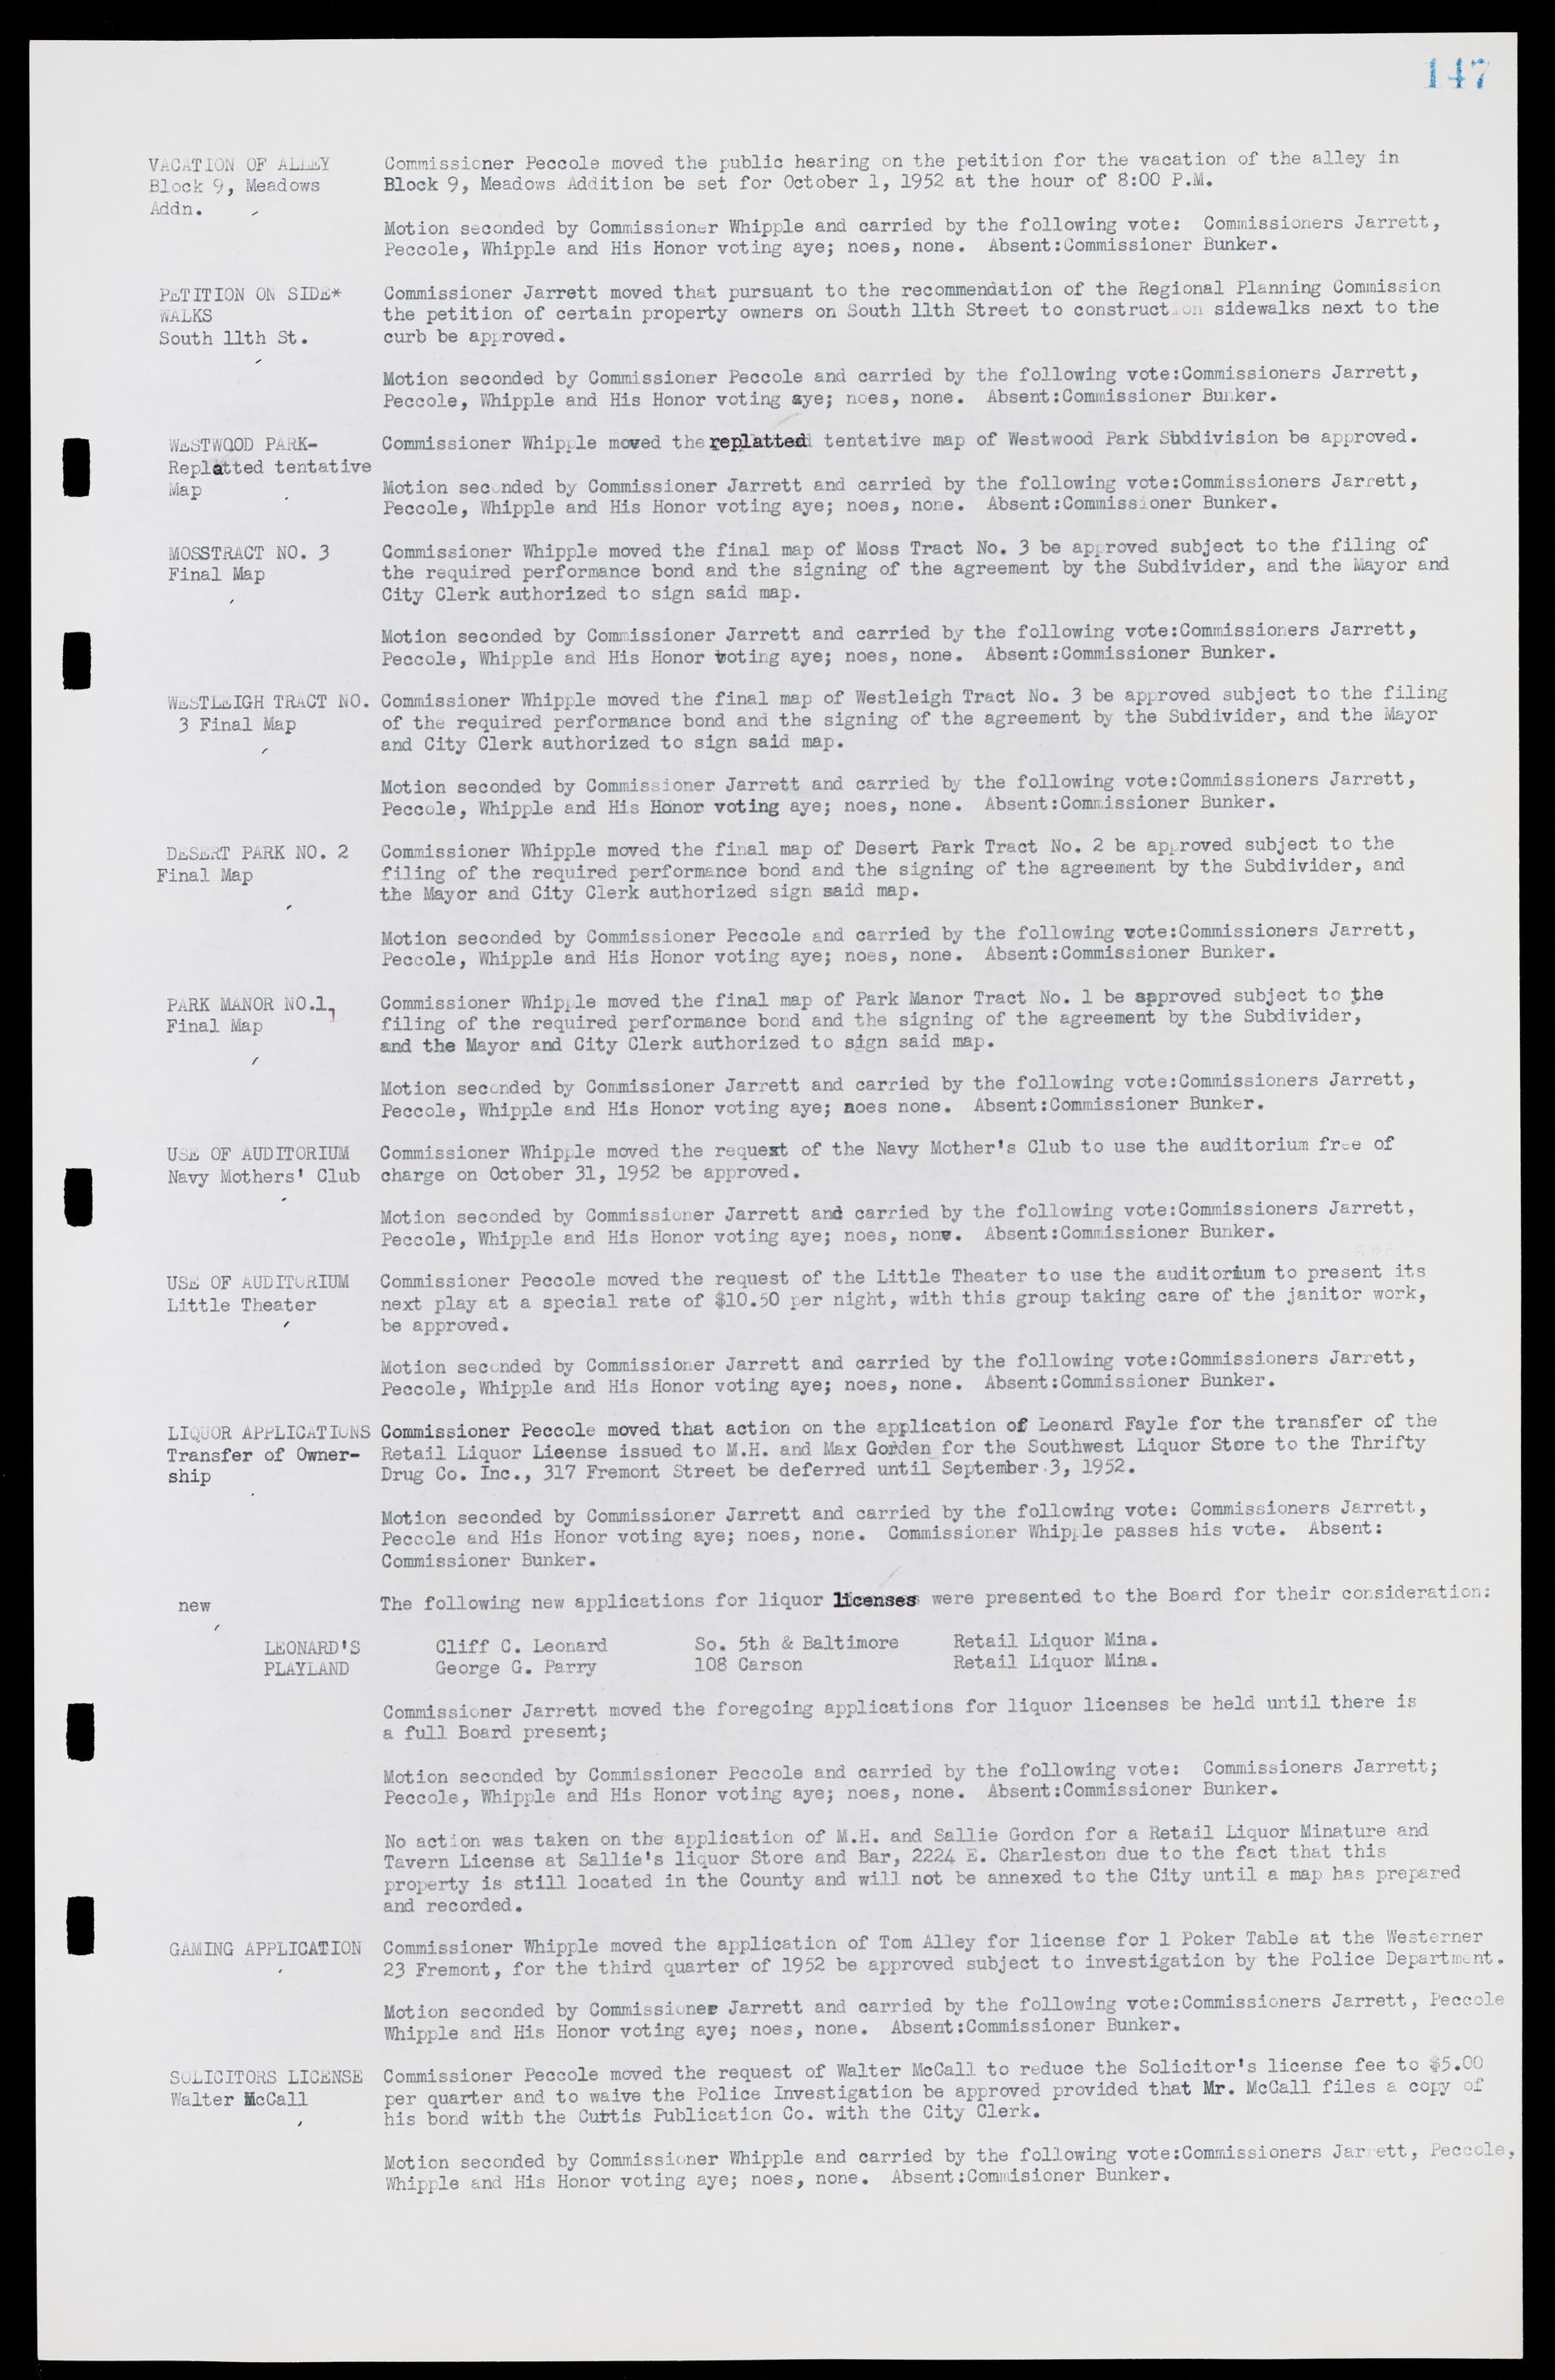 Las Vegas City Commission Minutes, May 26, 1952 to February 17, 1954, lvc000008-161